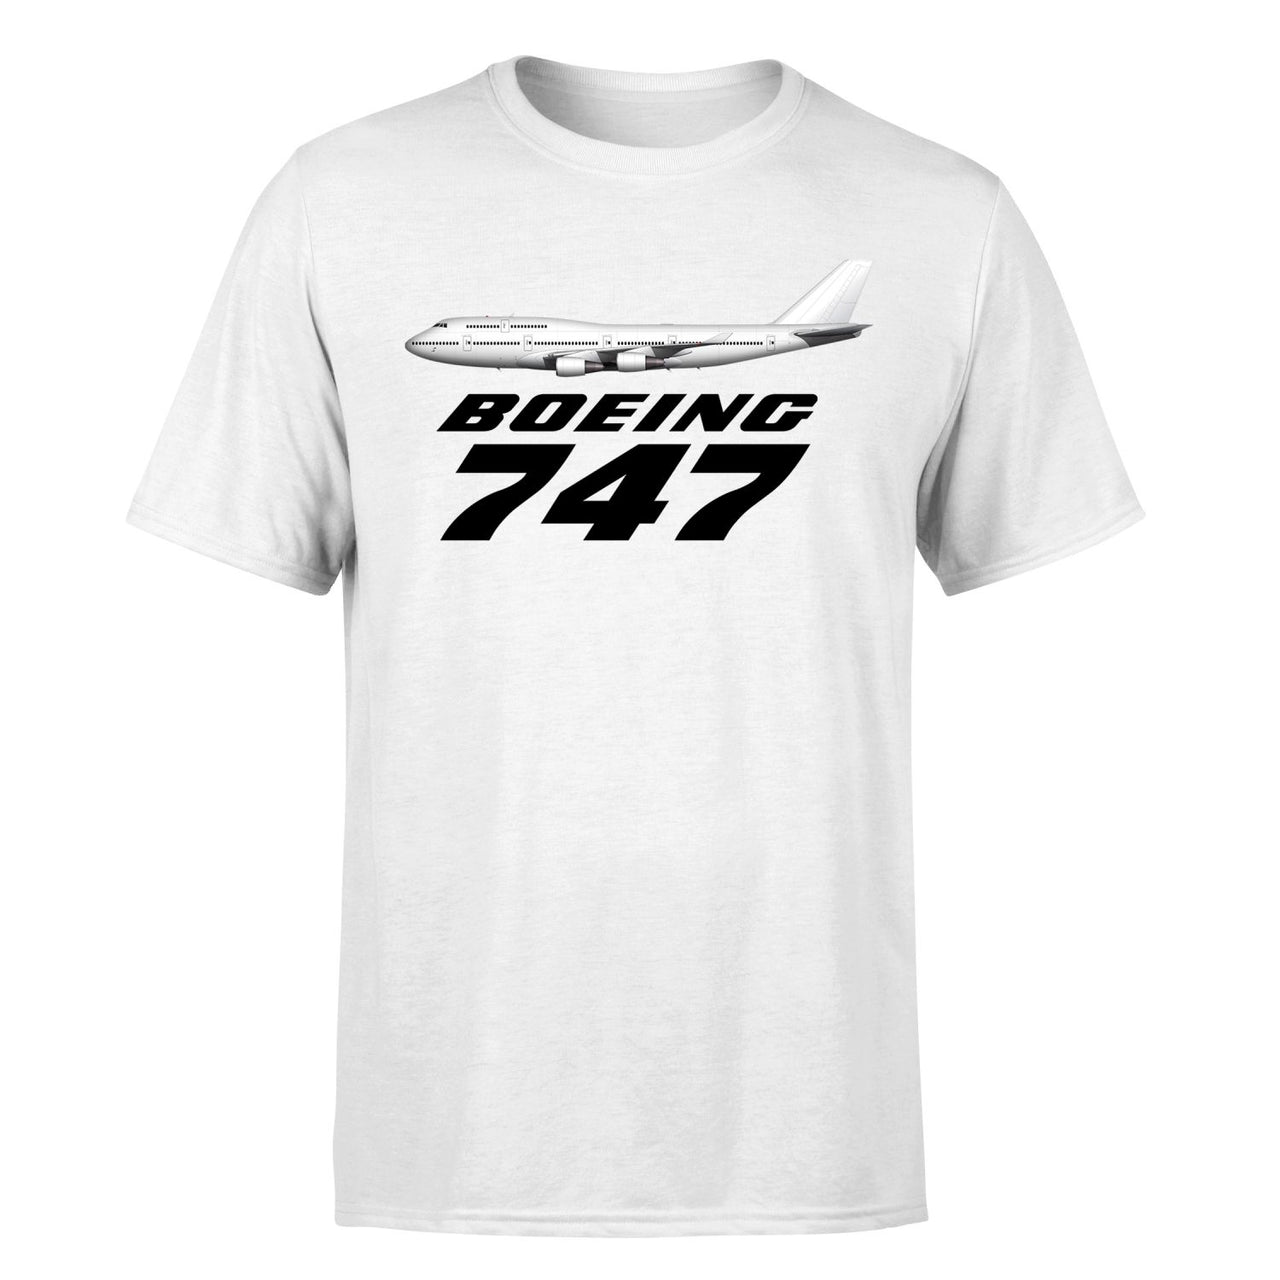 The Boeing 747 Designed T-Shirts